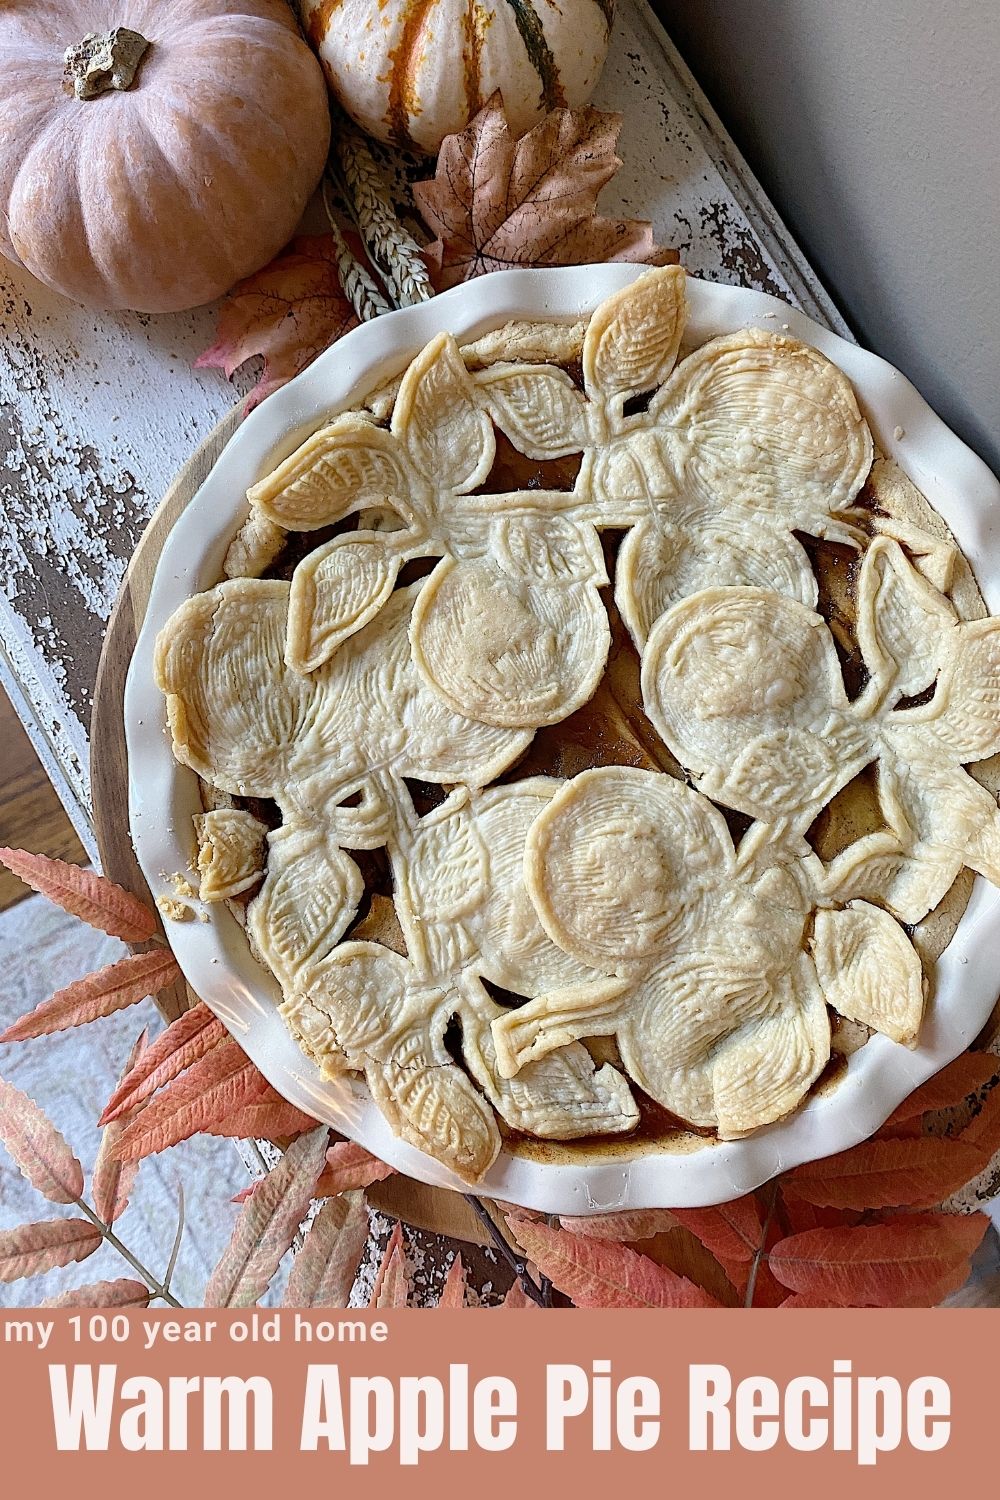 Fall baking is one of my favorite things so I made the most beautiful Warm Apple Pie a La Mode. I used a stamp from Iron Orchid Designs!